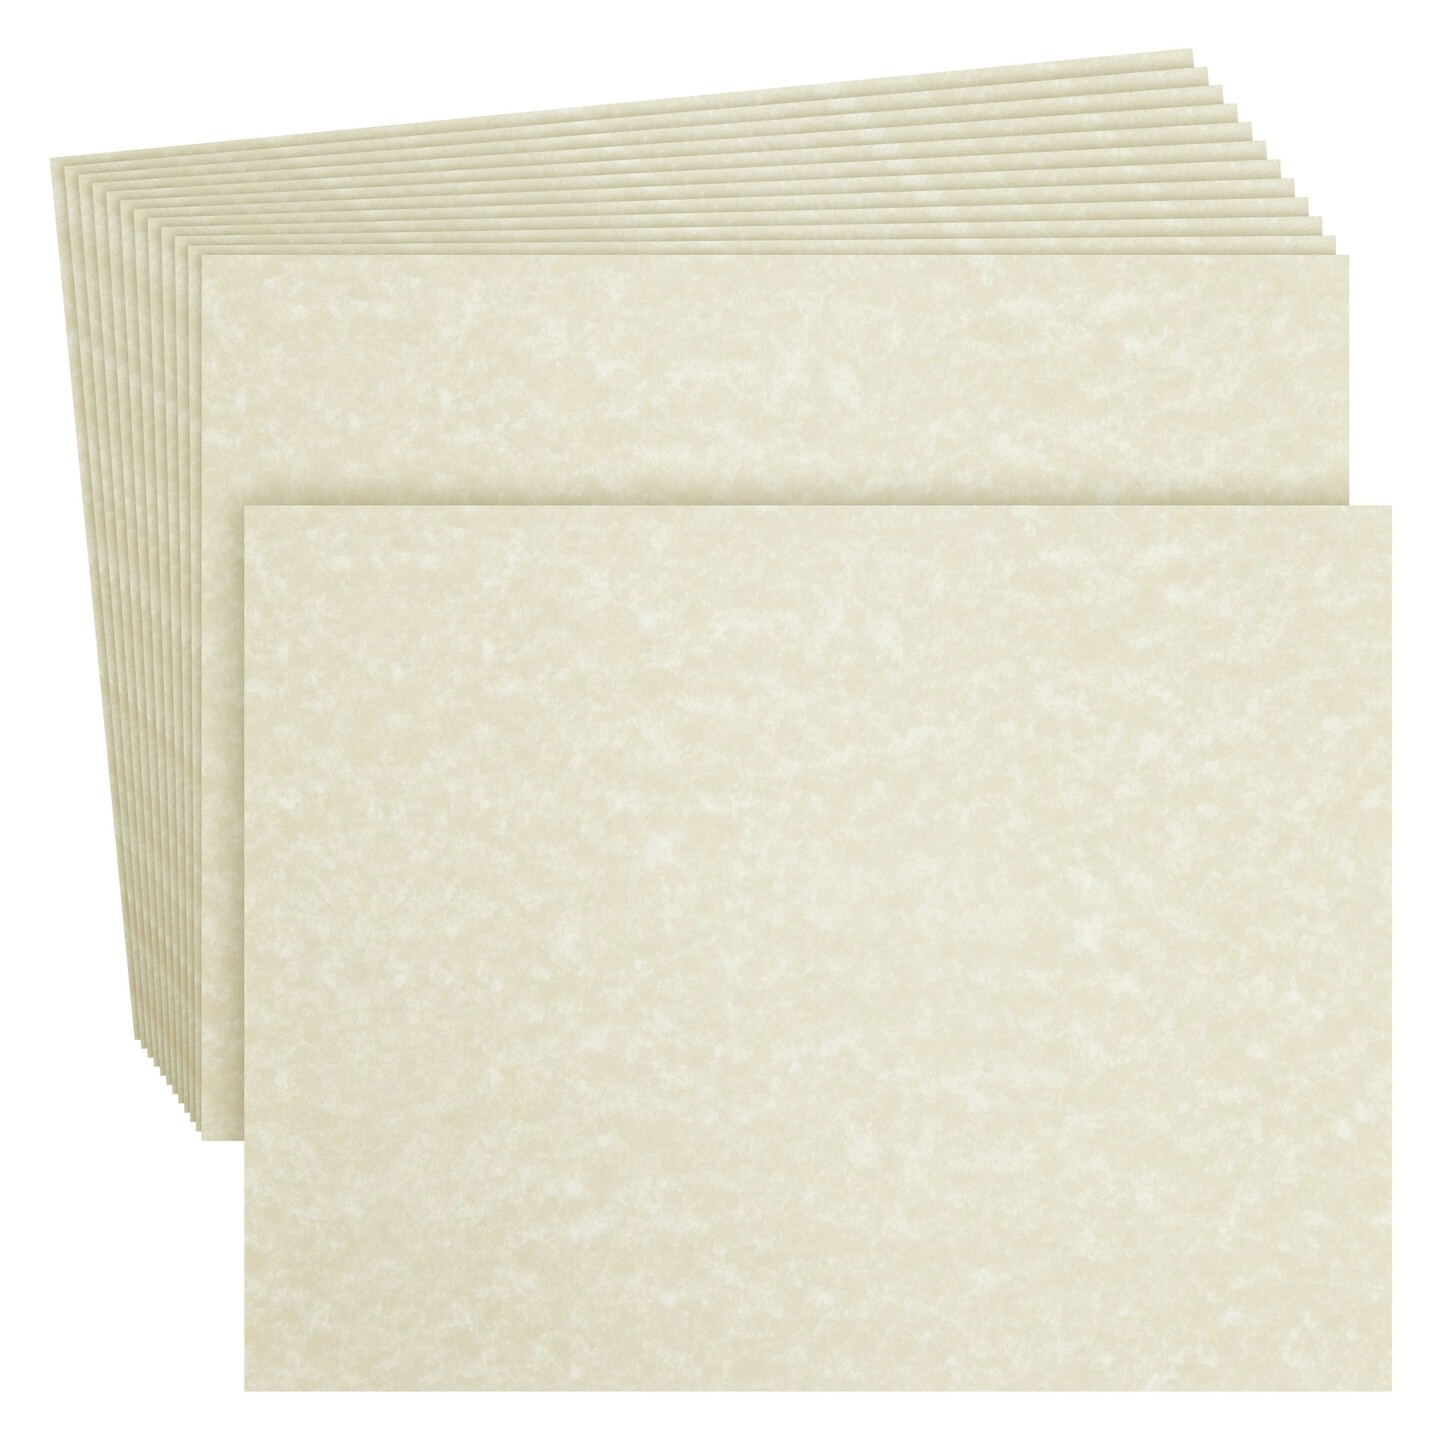 96 Sheets Parchment Paper for Certificates, Resumes, Diplomas, 90 GSM  Textured Stationary, Printer-Friendly (Cream, 8.5x11 in)